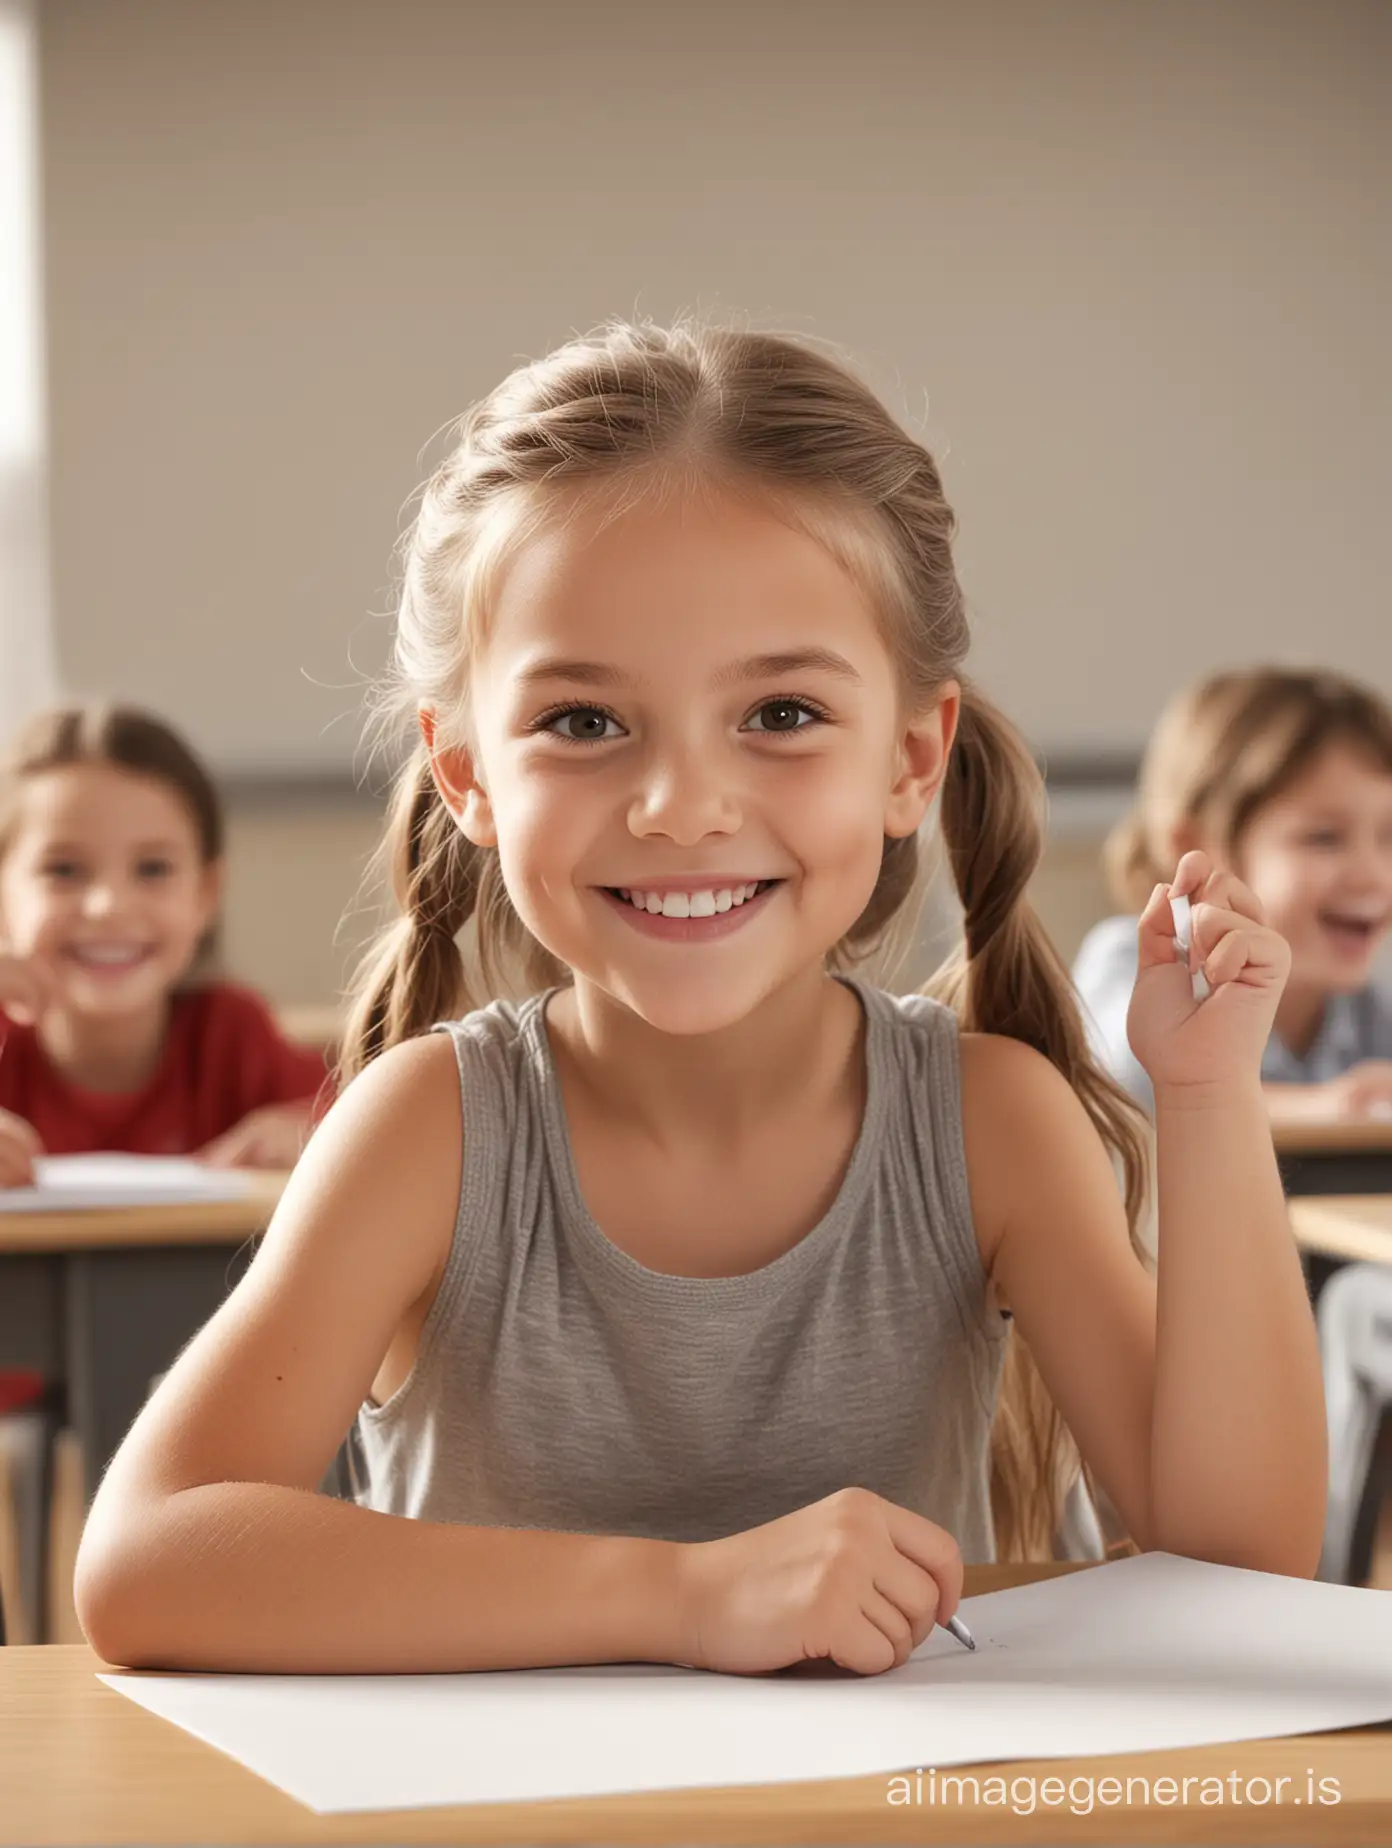 Photorealistic image of a smiling little girl in a classroom. She is holding a white paper. Focus on creating perfect, detailed fingers. The image should have high contrast, awesome lighting, and be highly detailed. Aim for a high-resolution output that looks incredibly lifelike.